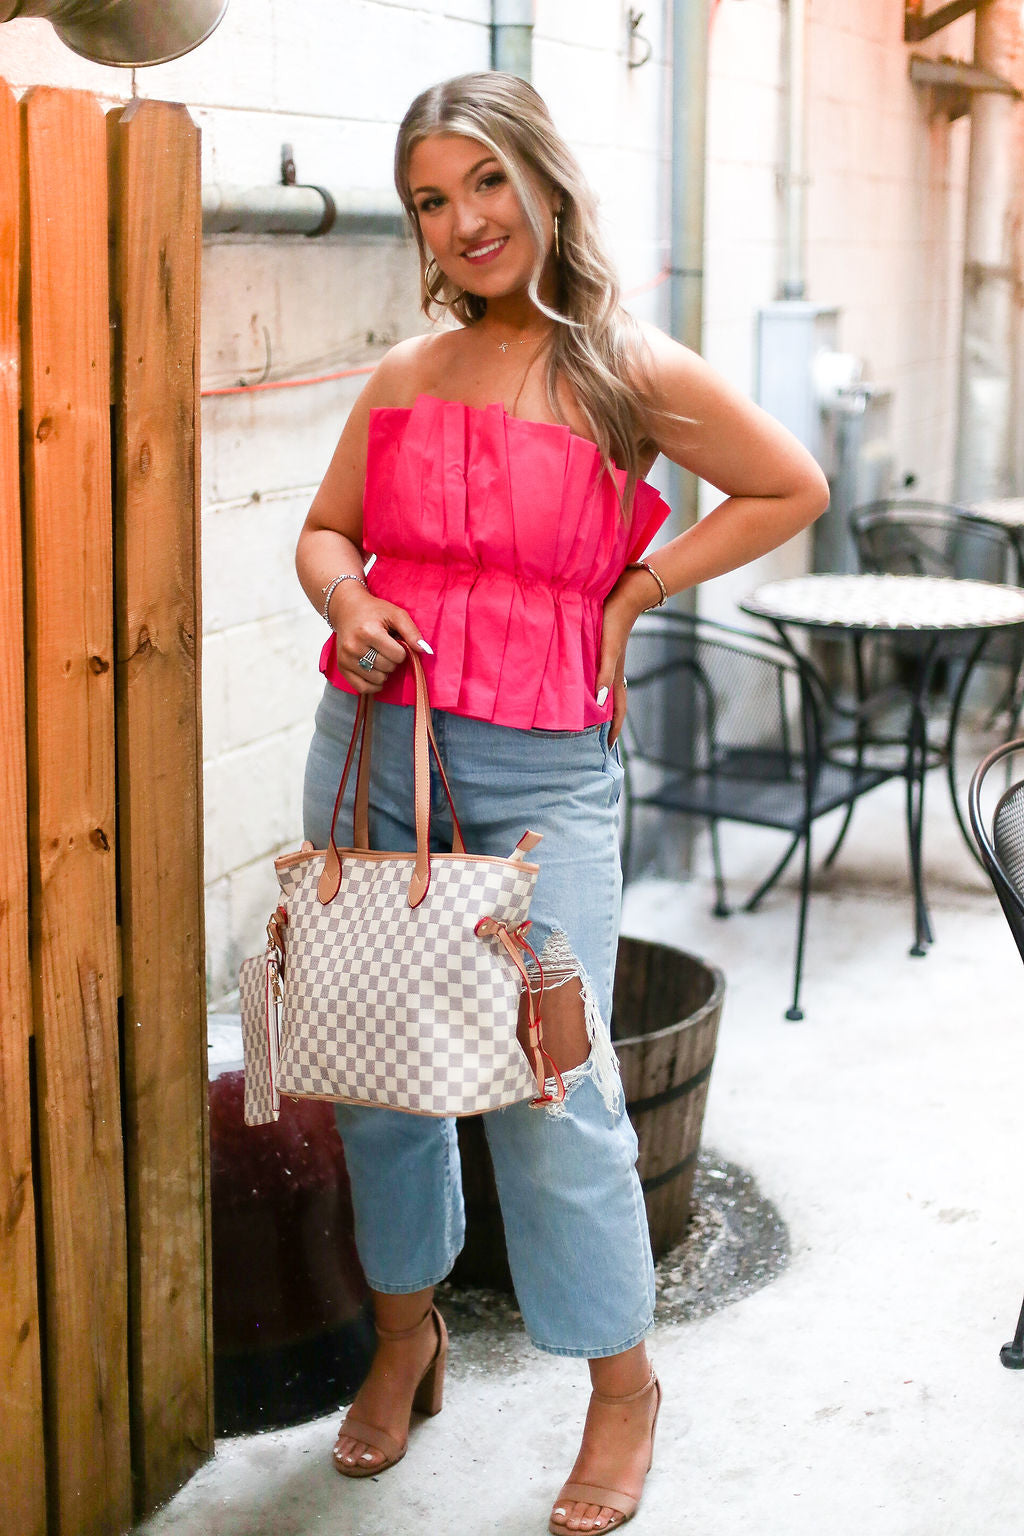 Pink Ruffle Tube Top - Shop Kendry Collection Boutique